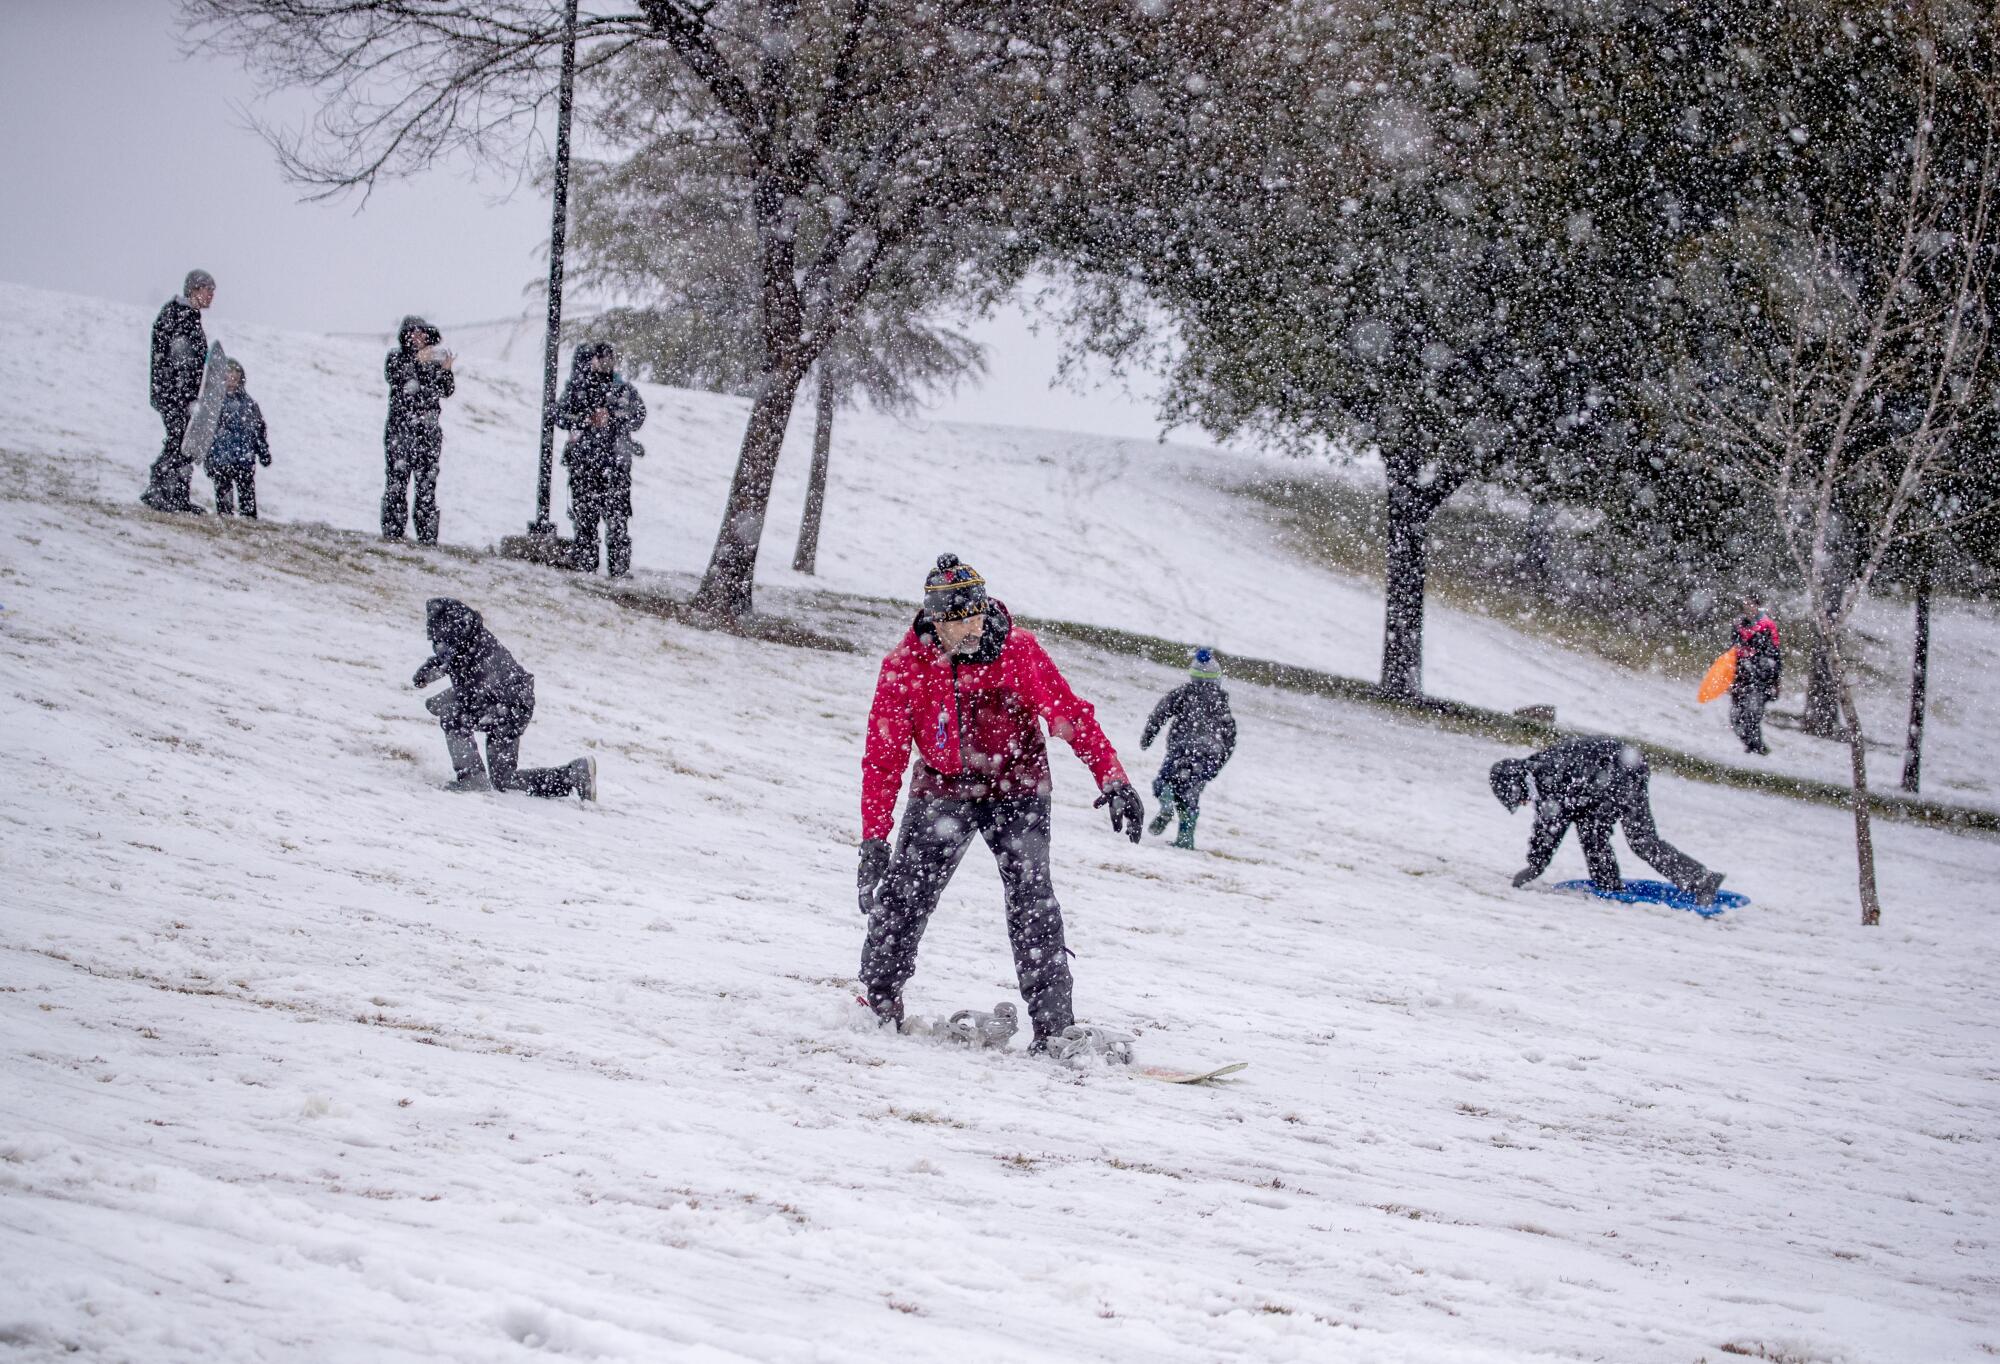 People snowboard and sled down a hill as snow still falls.